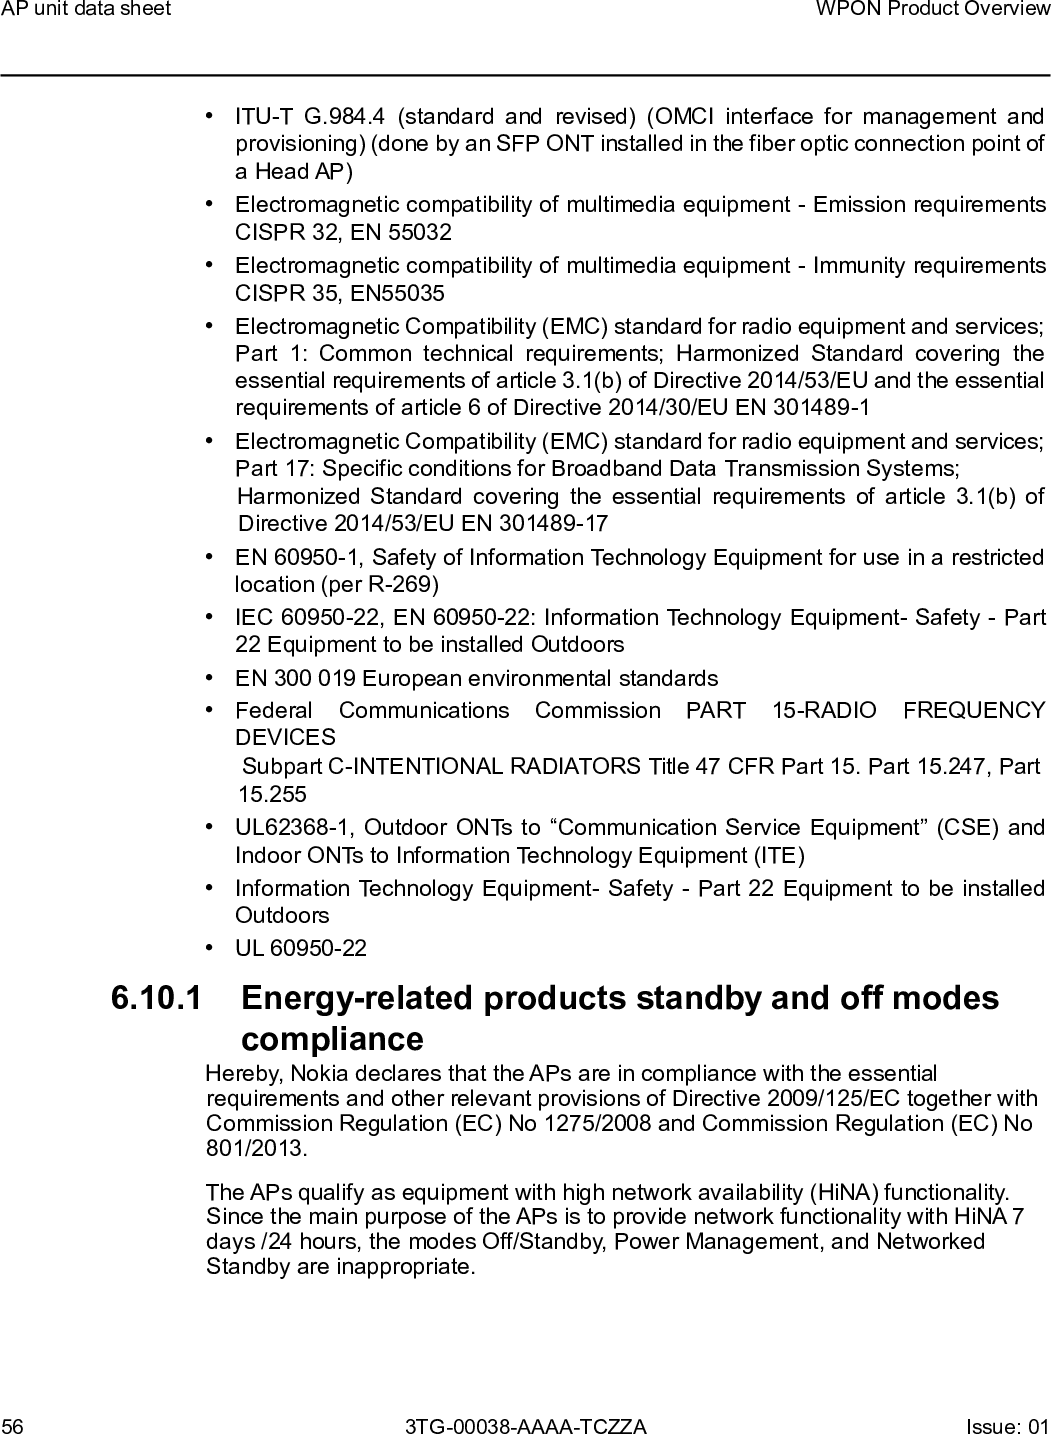 Page 56 of Nokia Bell 7577WPONAPDC WPON User Manual WPON Product Overview